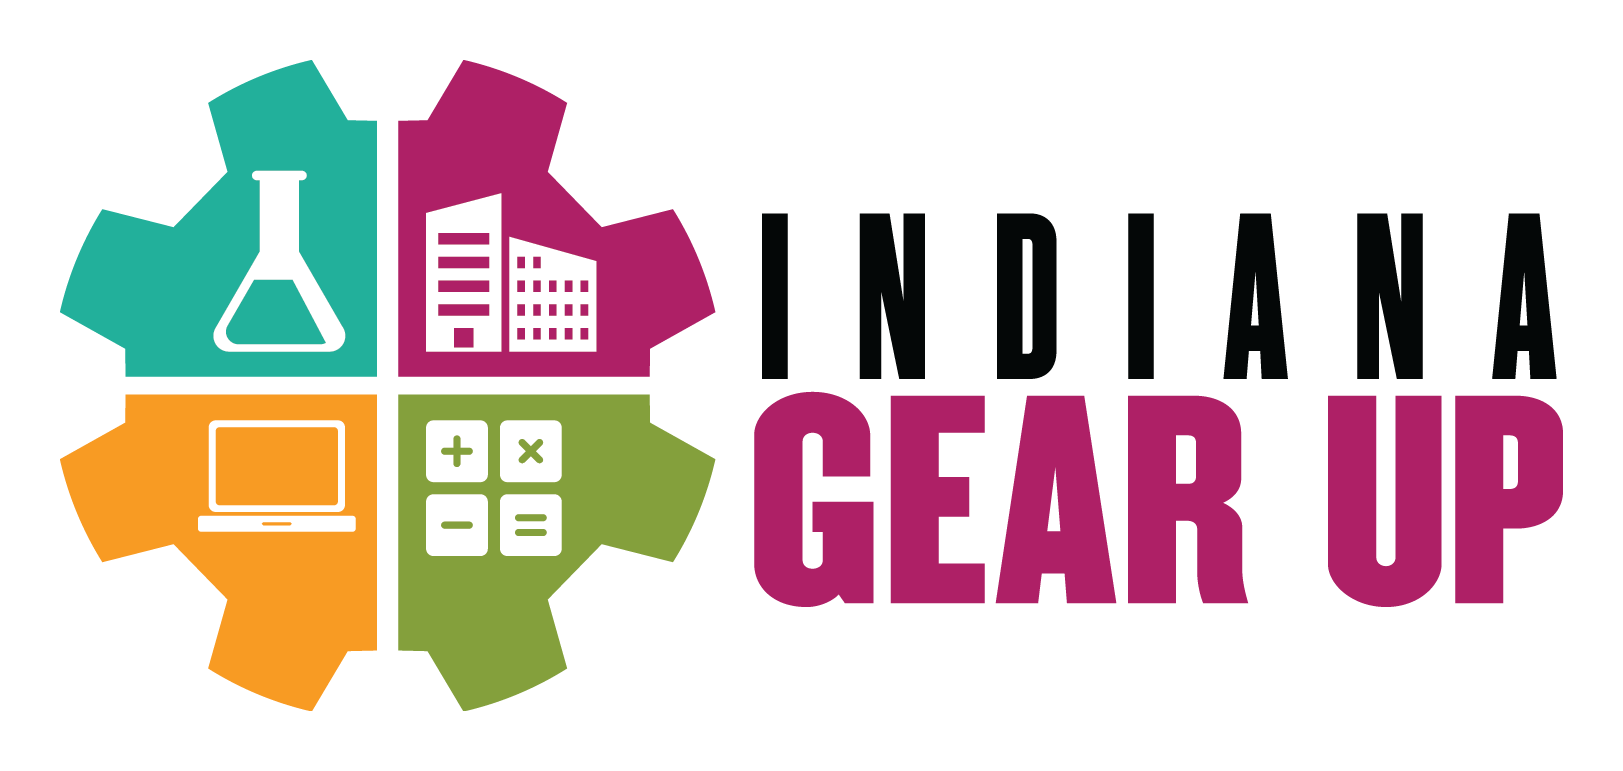 IN-GEAR-UP-Transparent-mark-RGB-LG.png